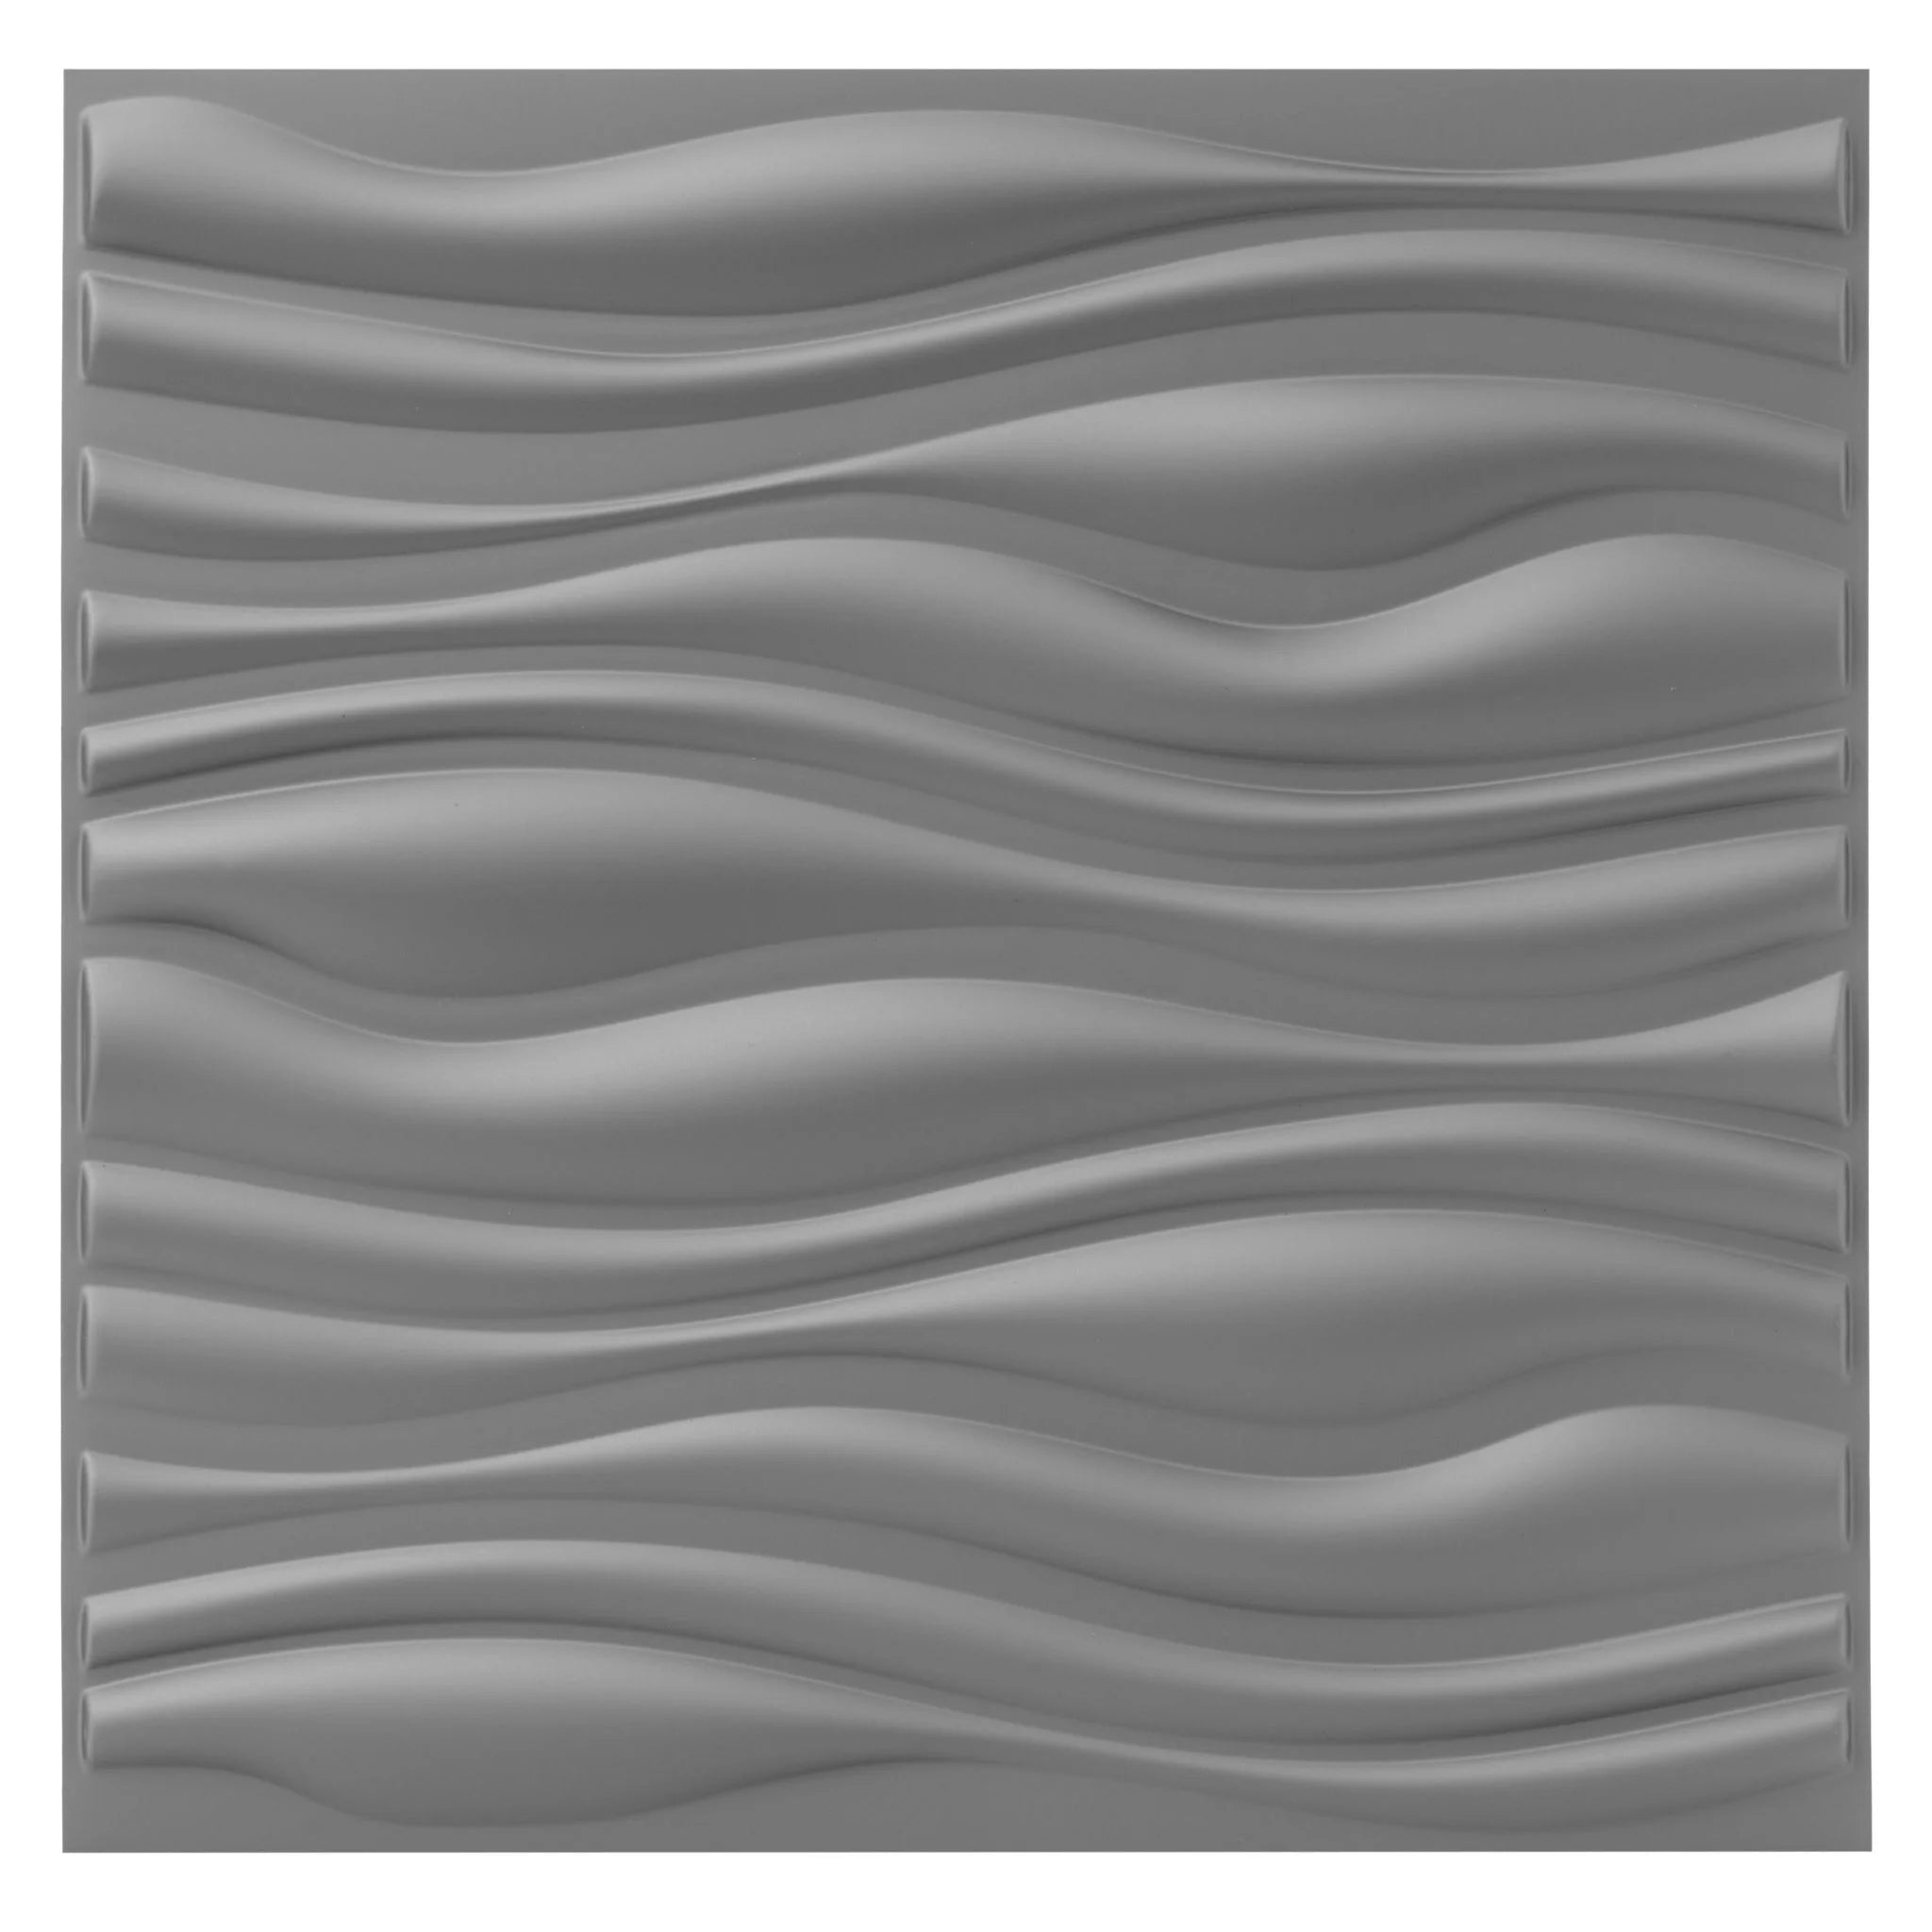 Silver PVC wall panel with wavy patterns, close-up view